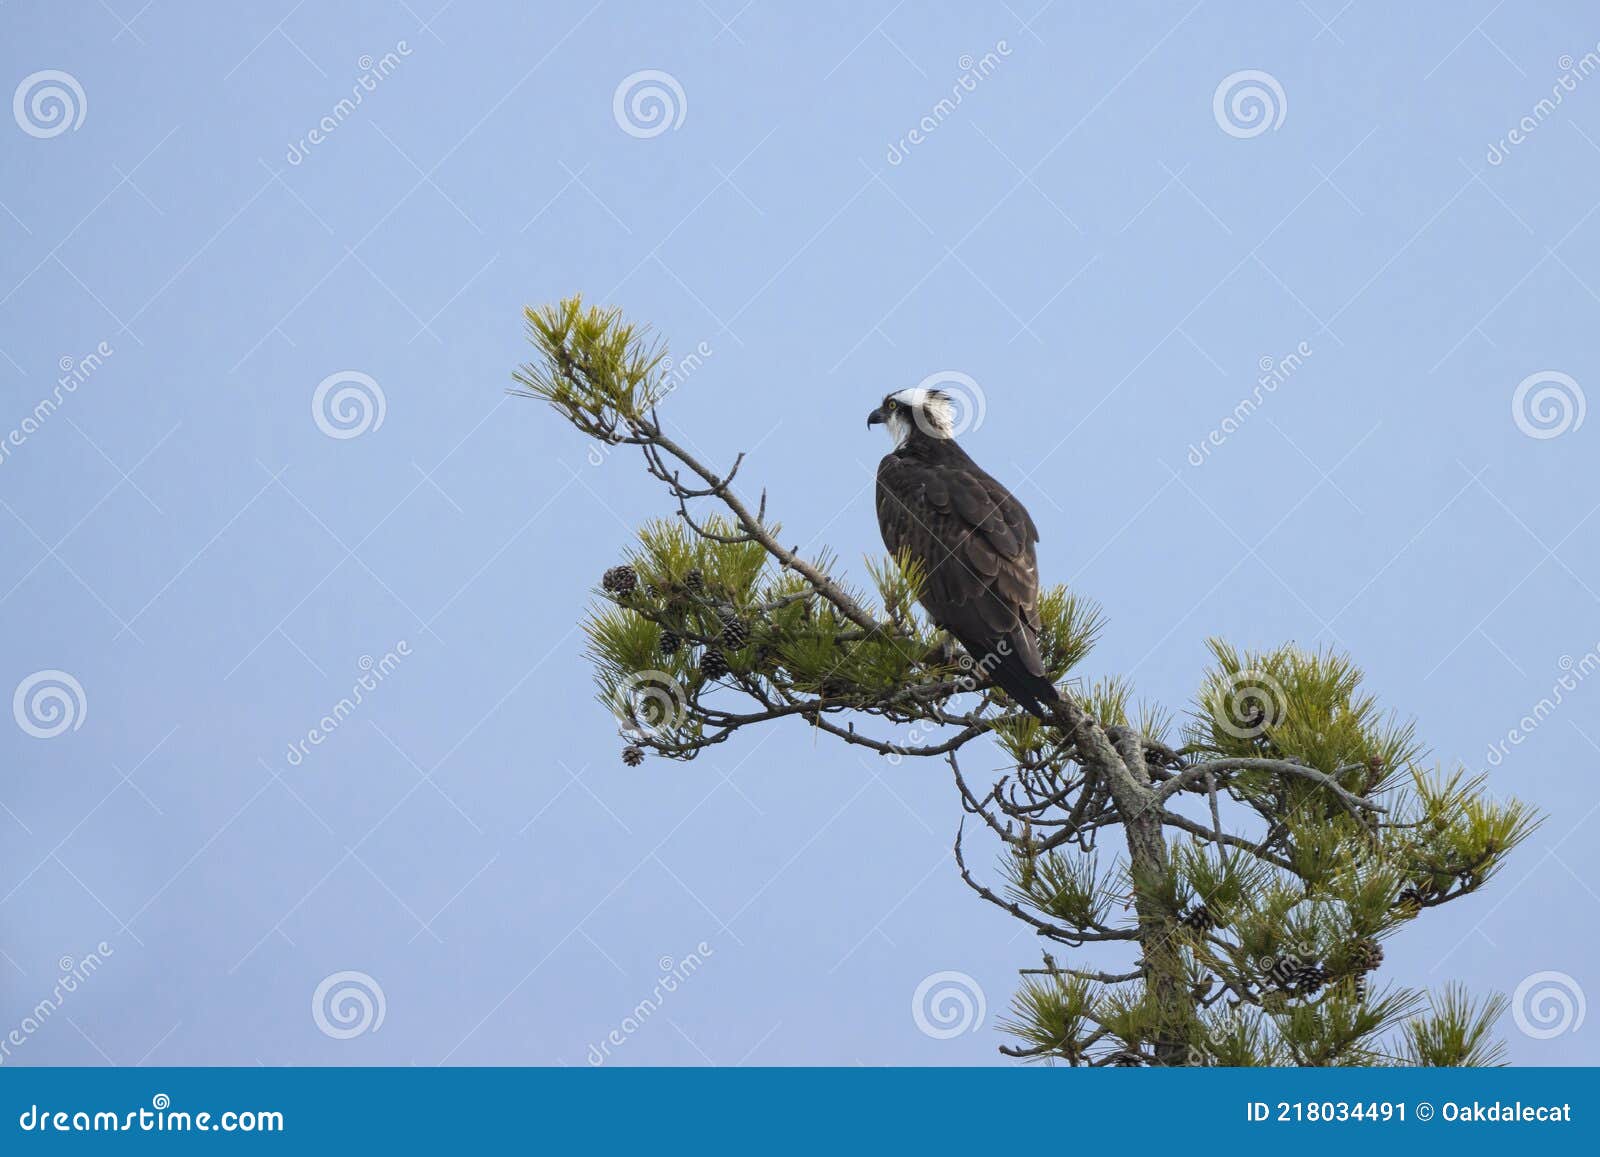 Osprey, or Fish Hawk on a Pine Stock Image - Image of bird, large: 218034491